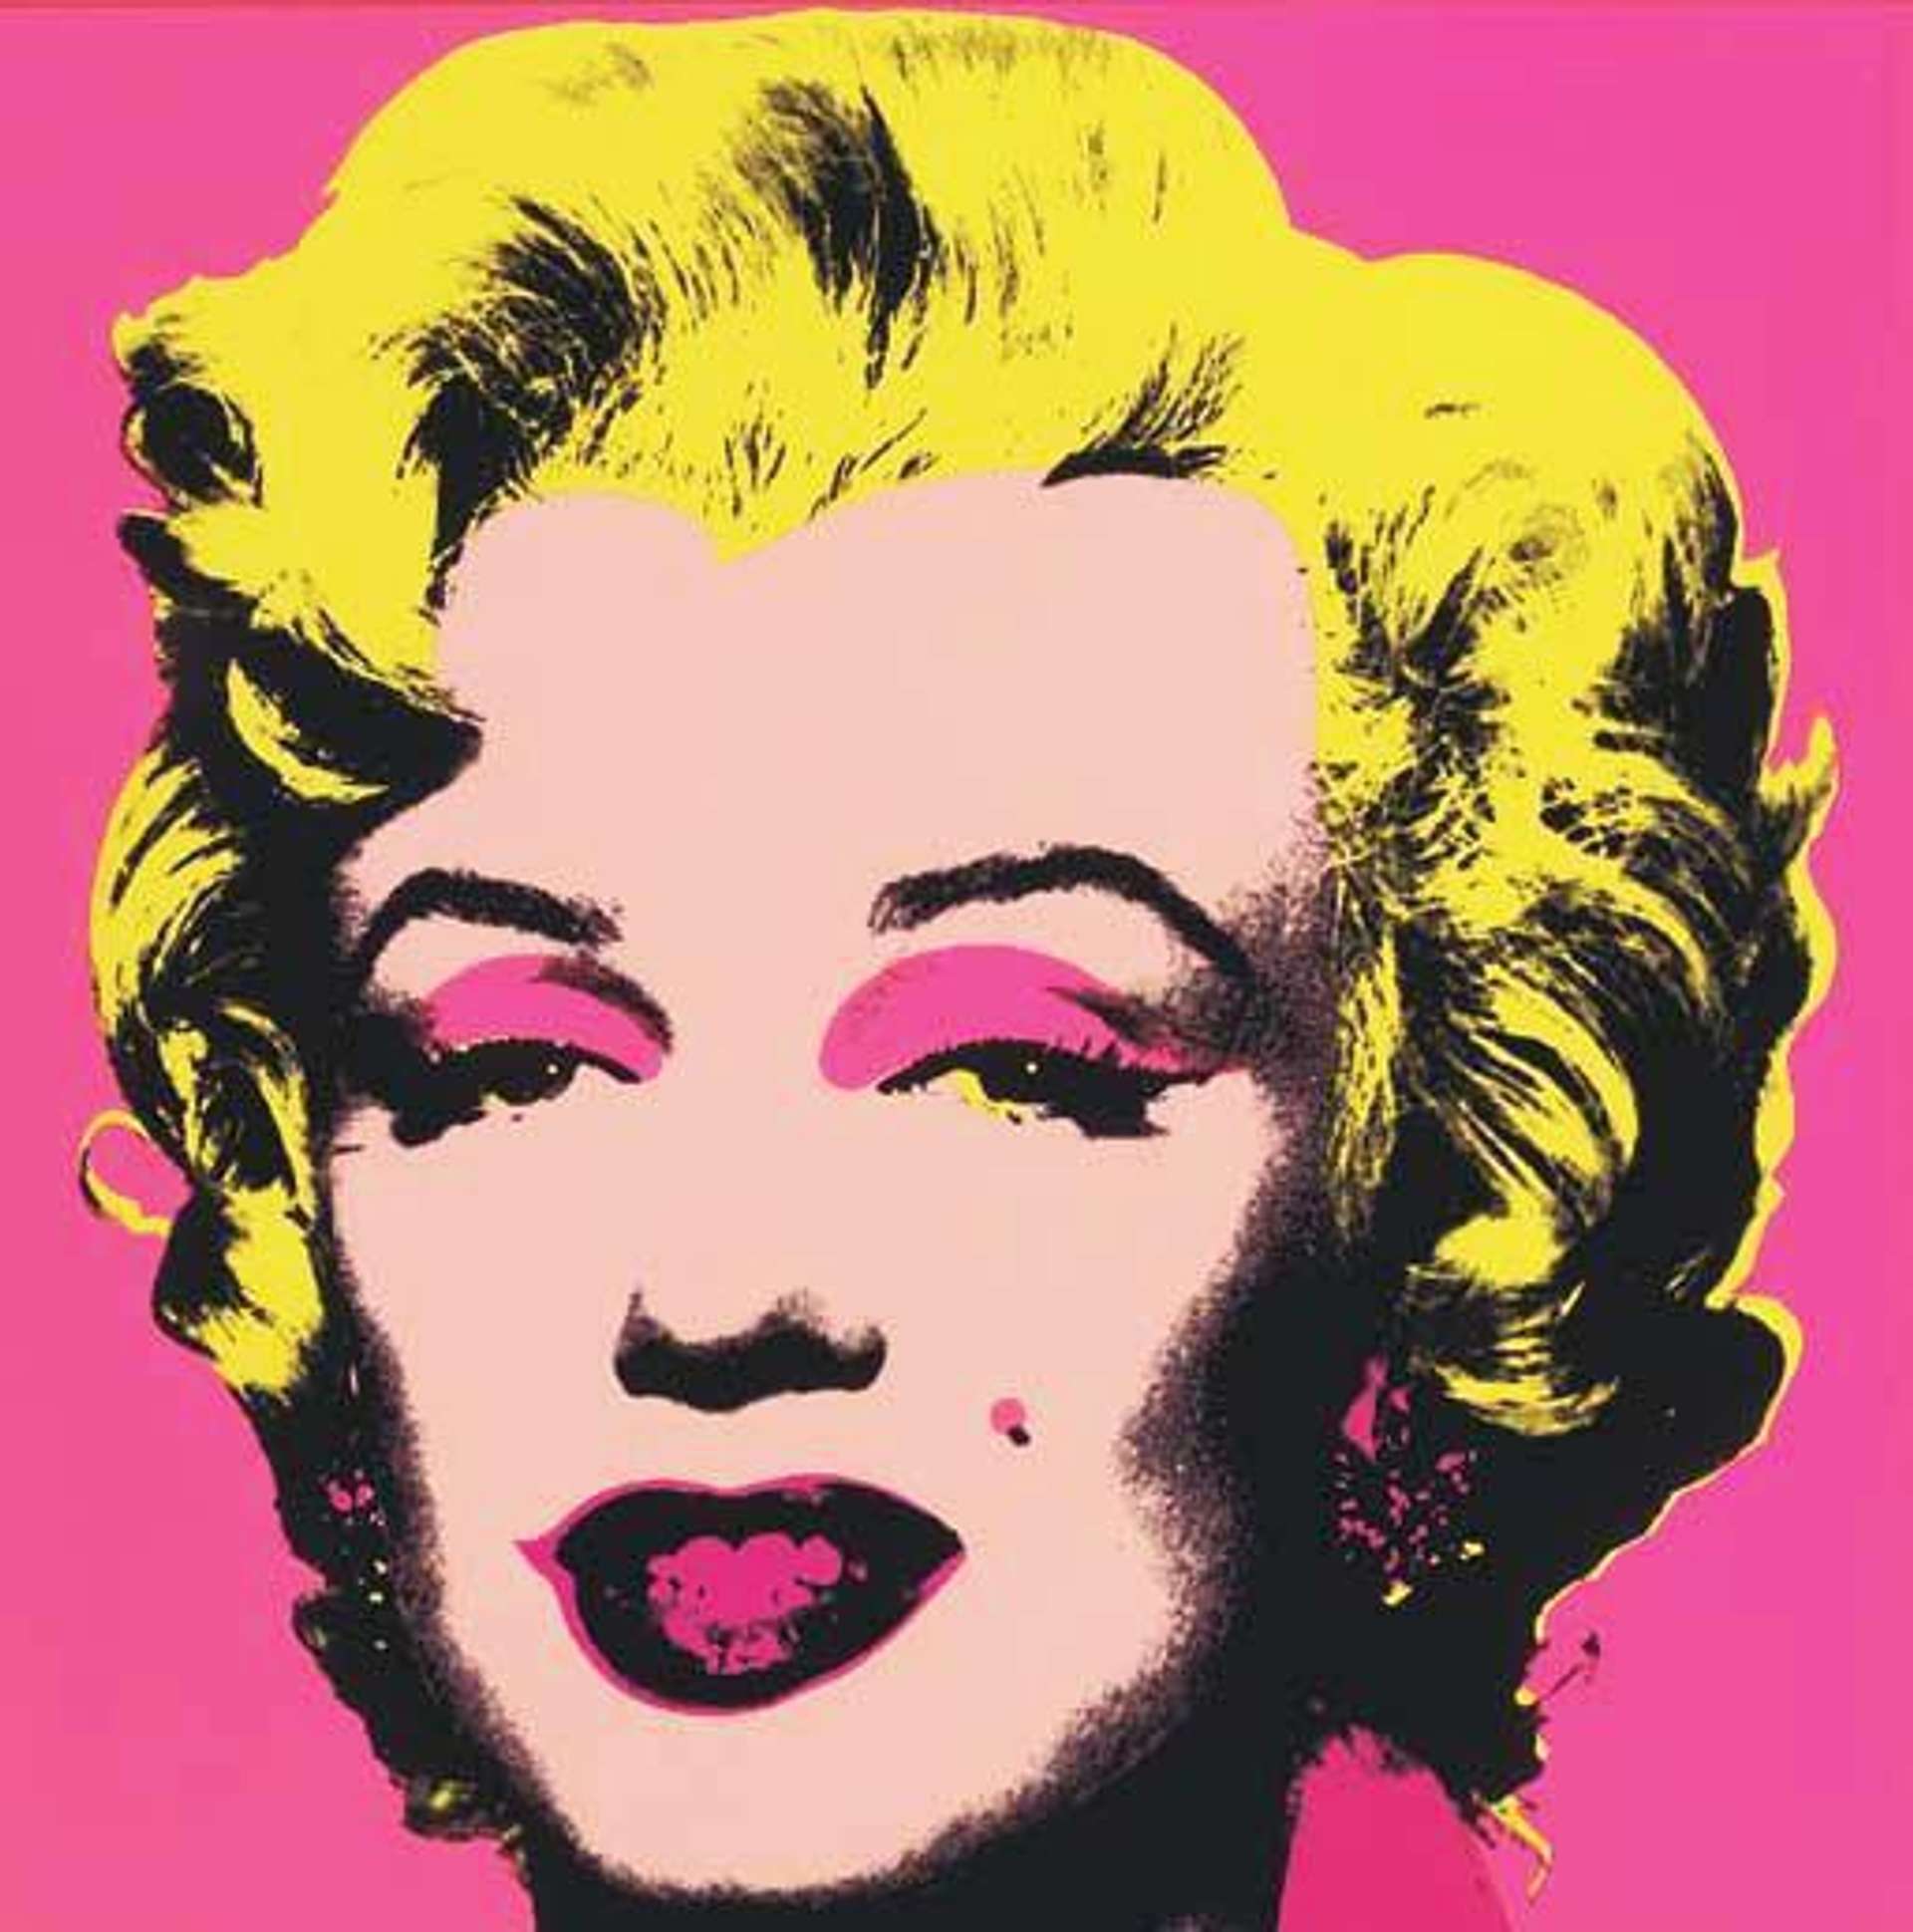 Famous Andy Warhol Art | peacecommission.kdsg.gov.ng